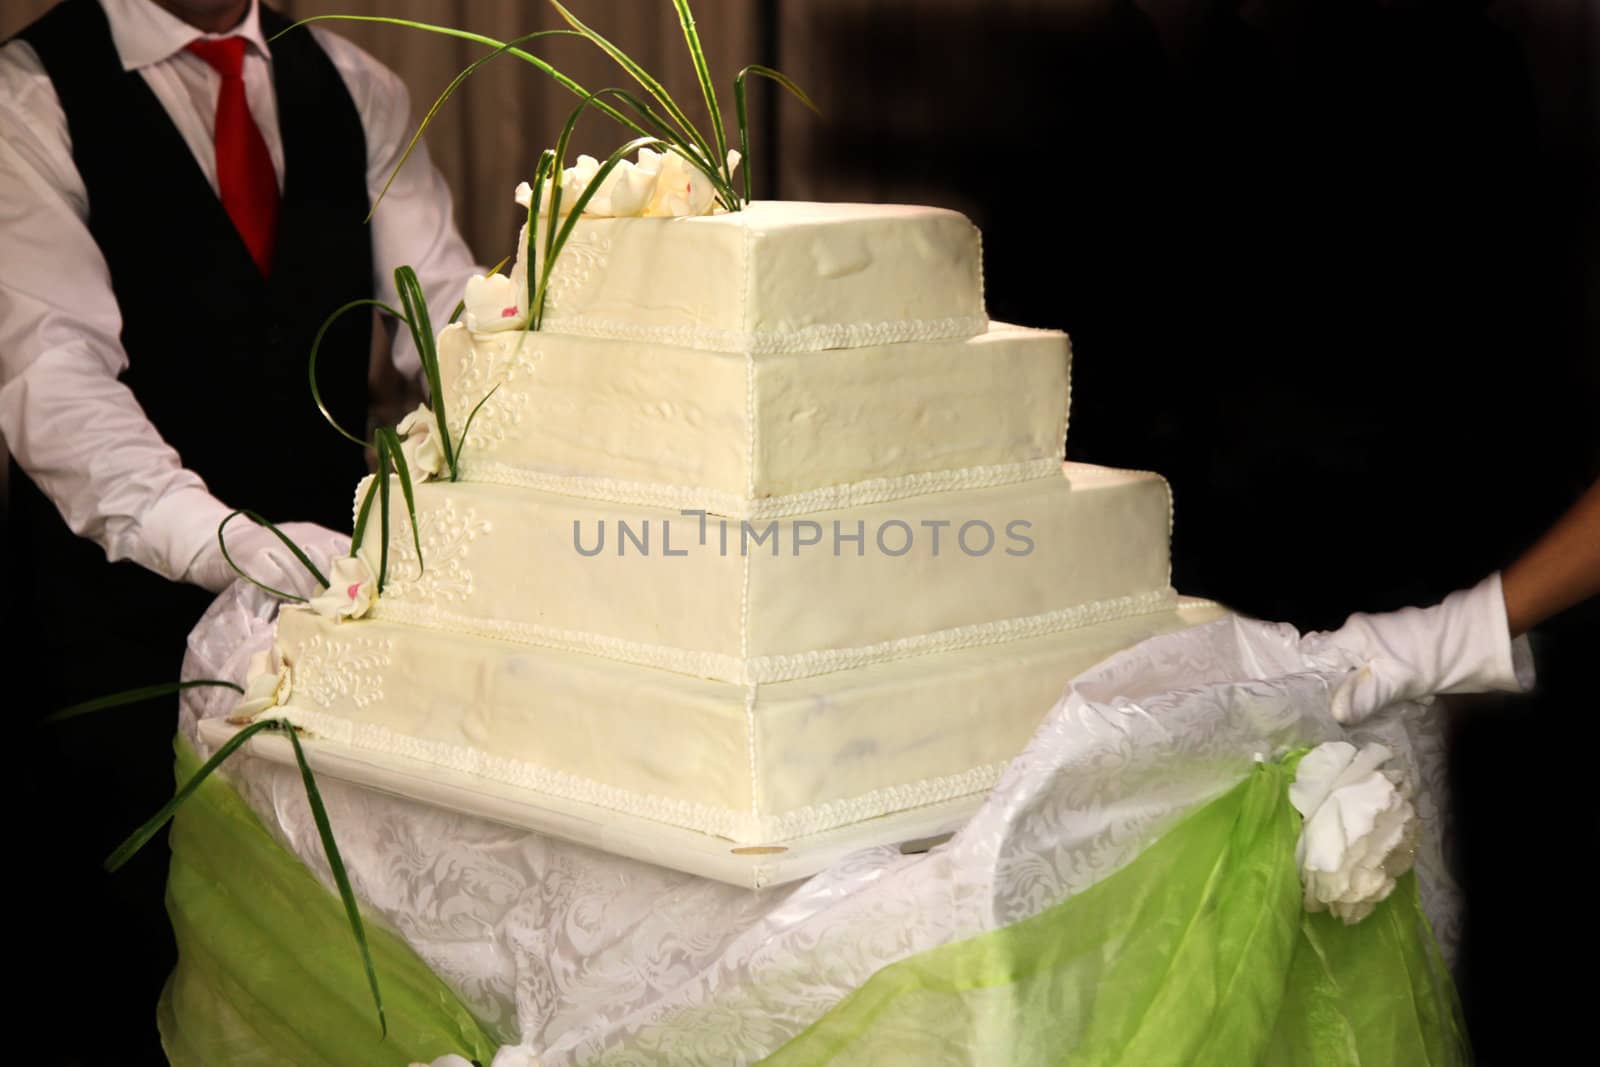 Wedding cake or birthday cake is served by Farina6000